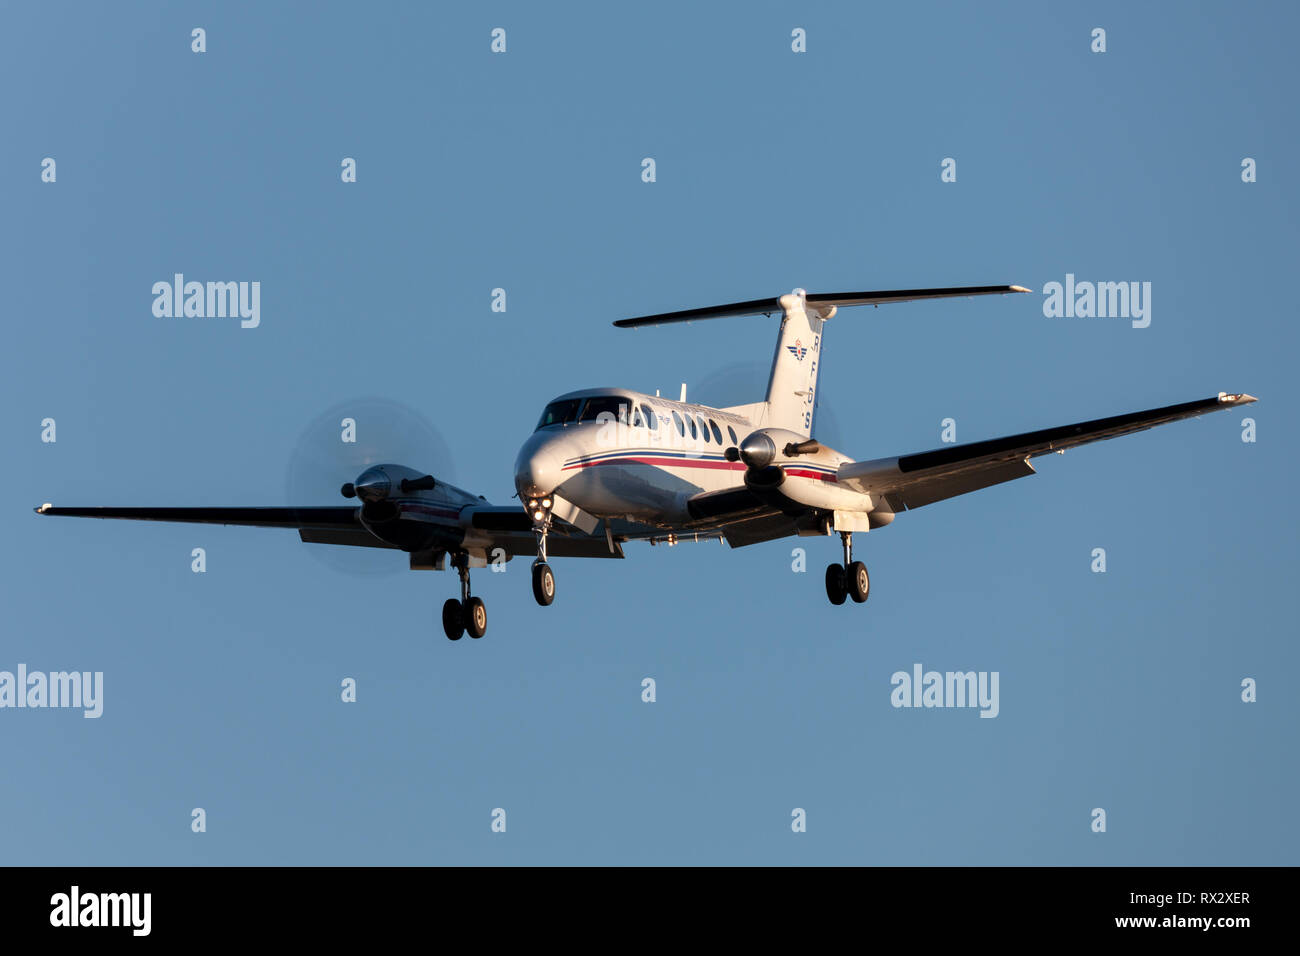 Royal Flying Doctors Service of Australia Beechcraft Super King Air 200 twin engined turboprop aircraft on approach to land at Adelaide Airport. Stock Photo